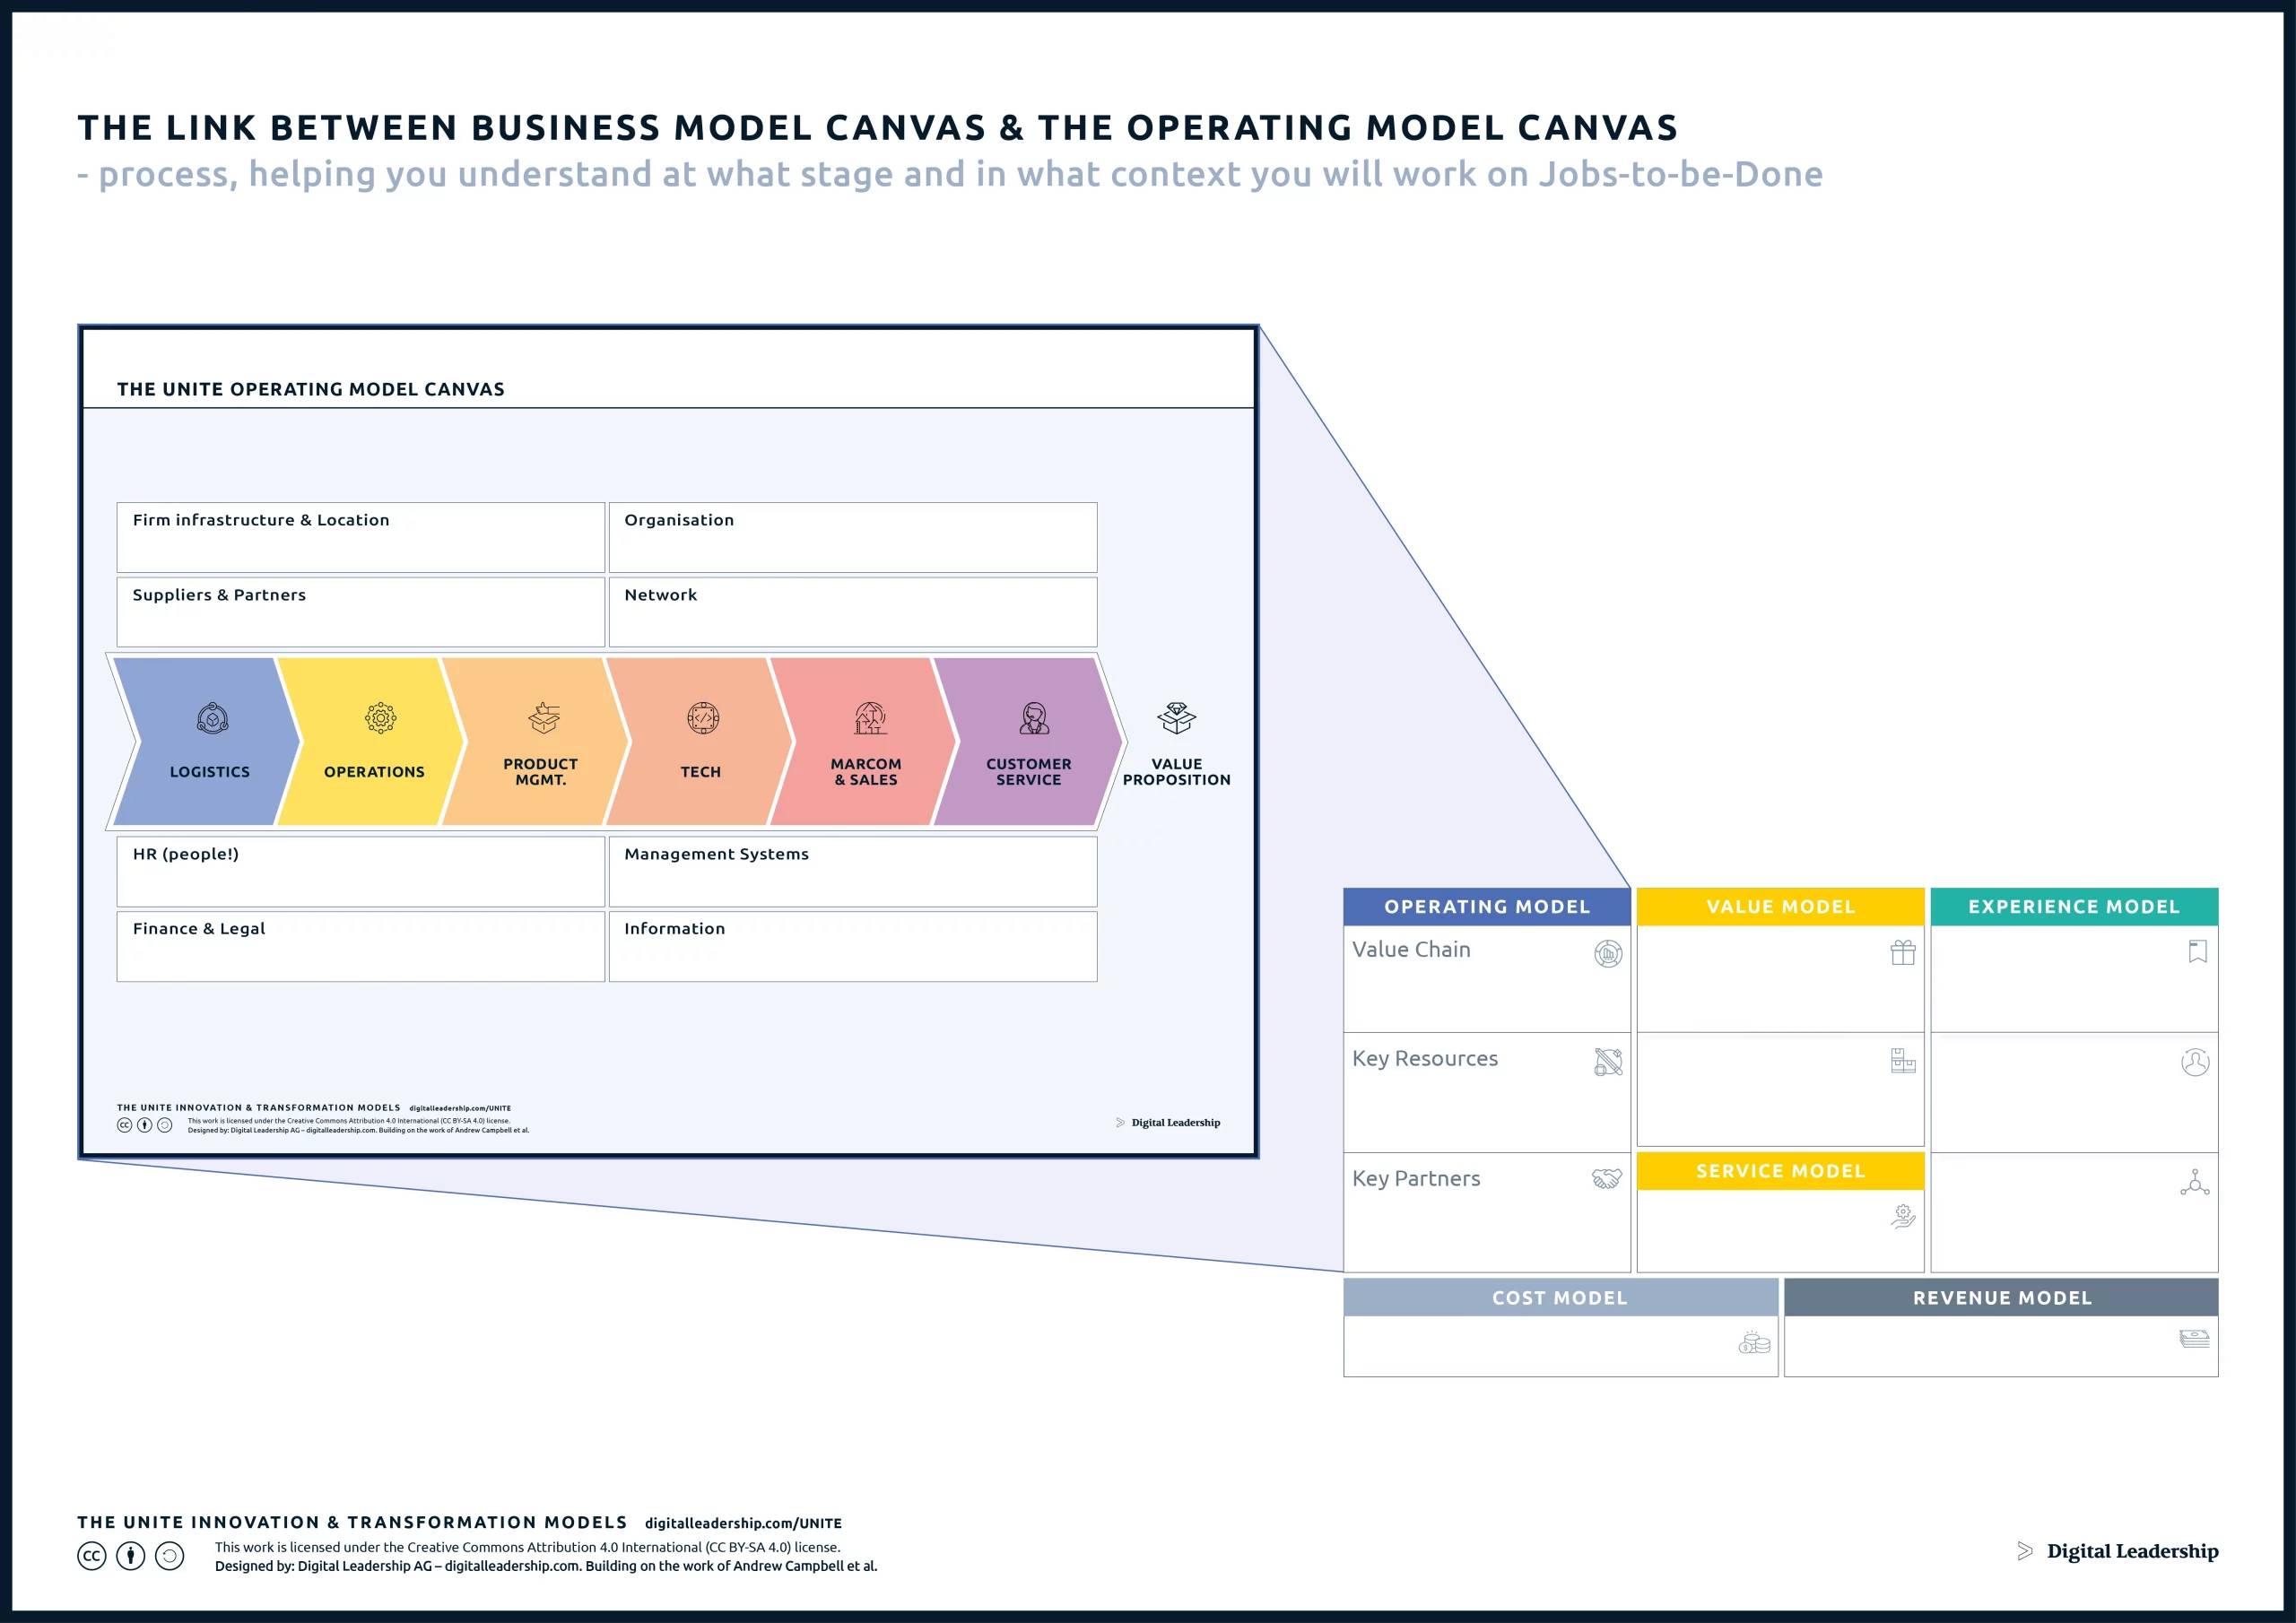 The Link Between Business Model Canvas & Opertaing Model Canvas
